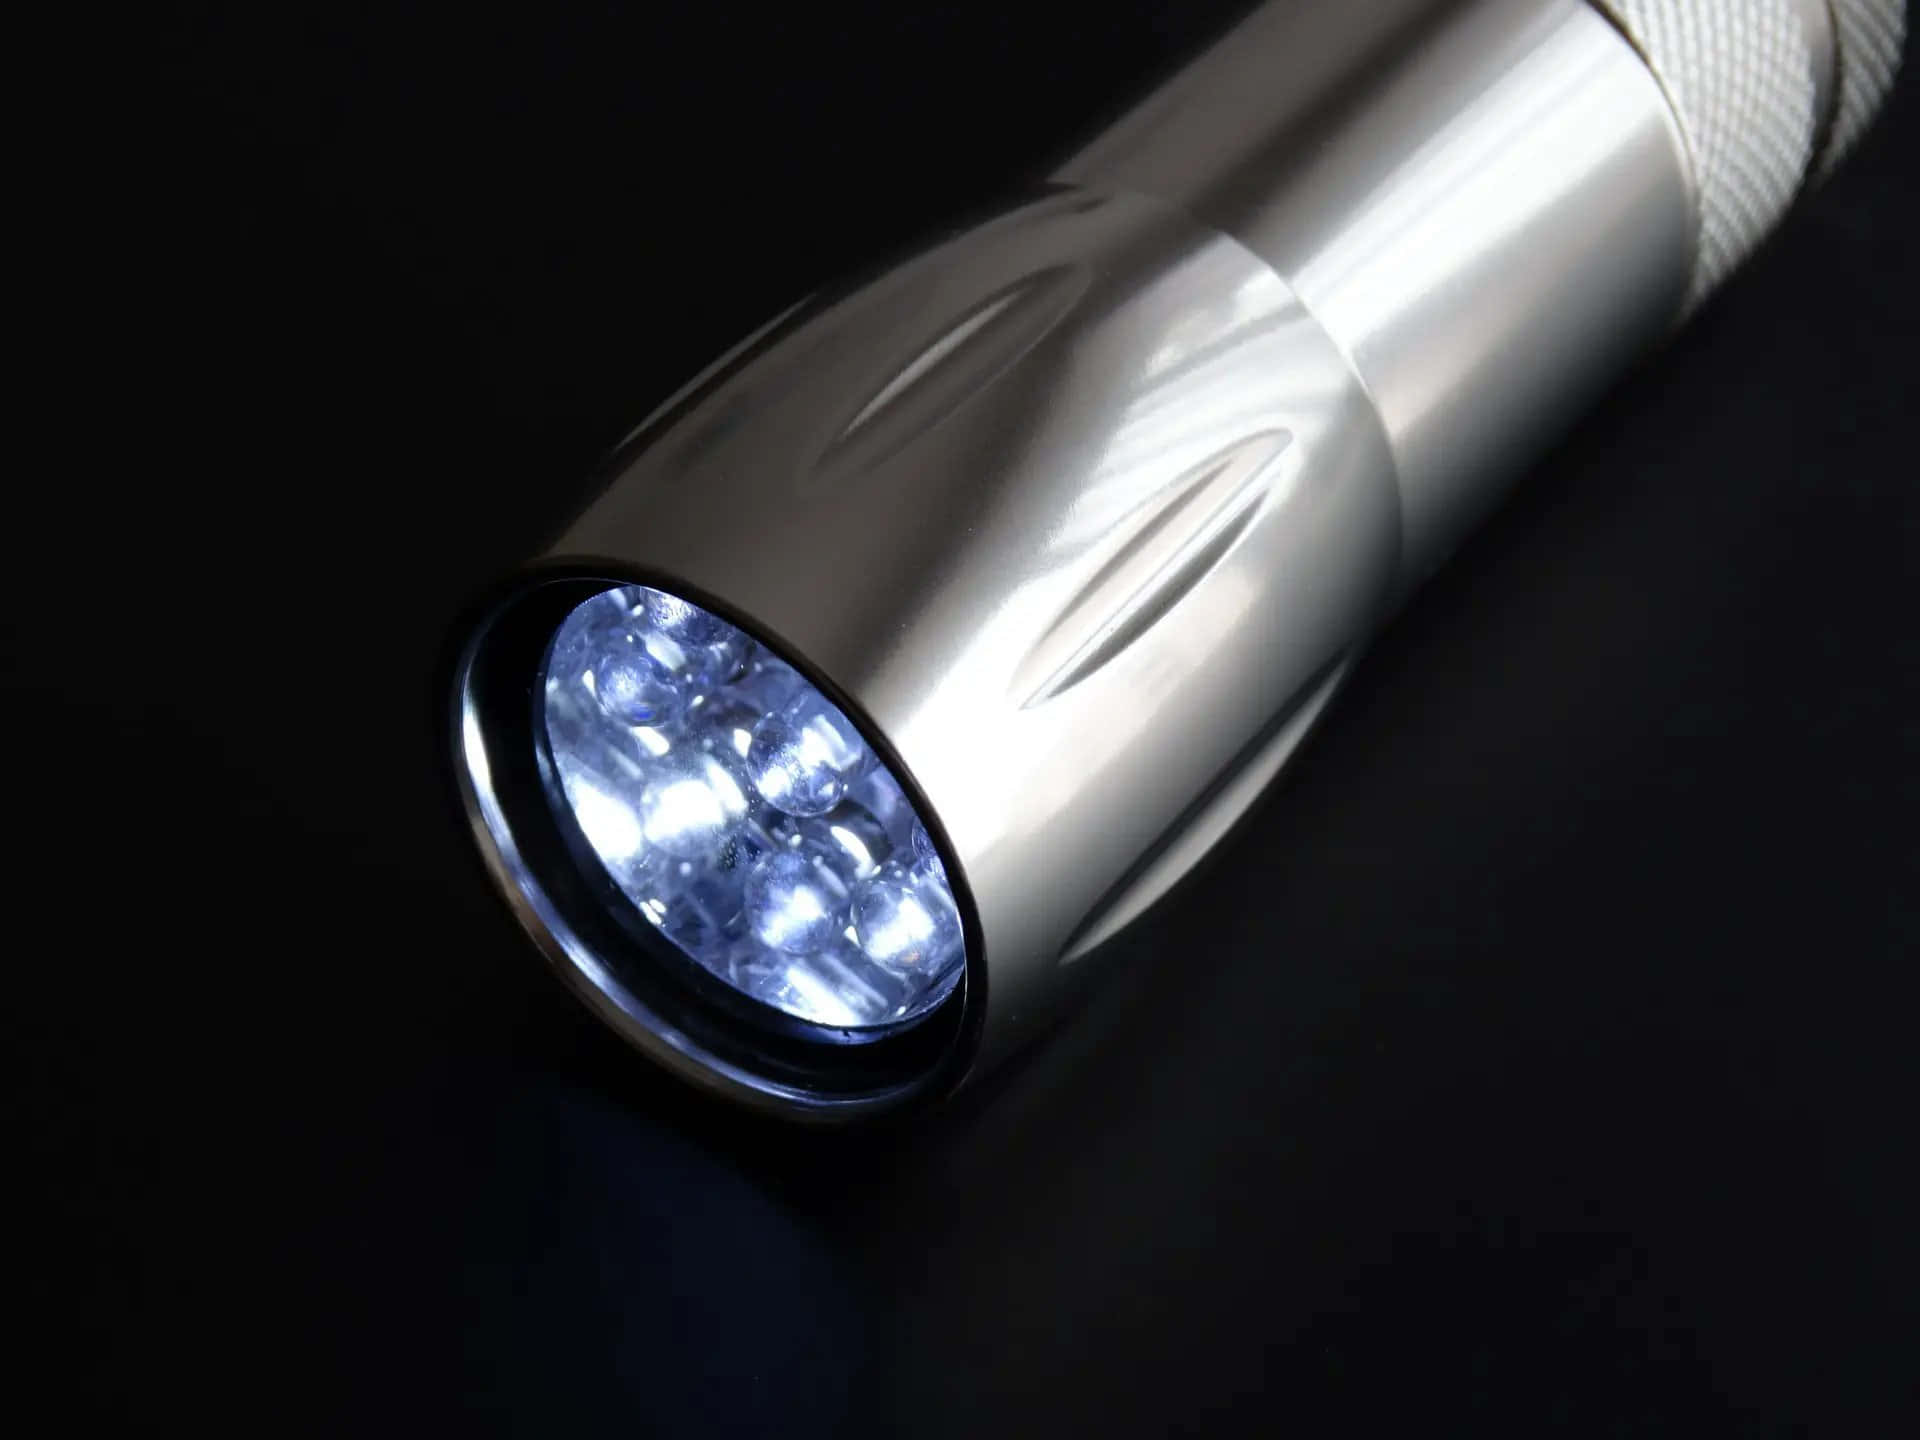 A Flashlight With A White Light On It